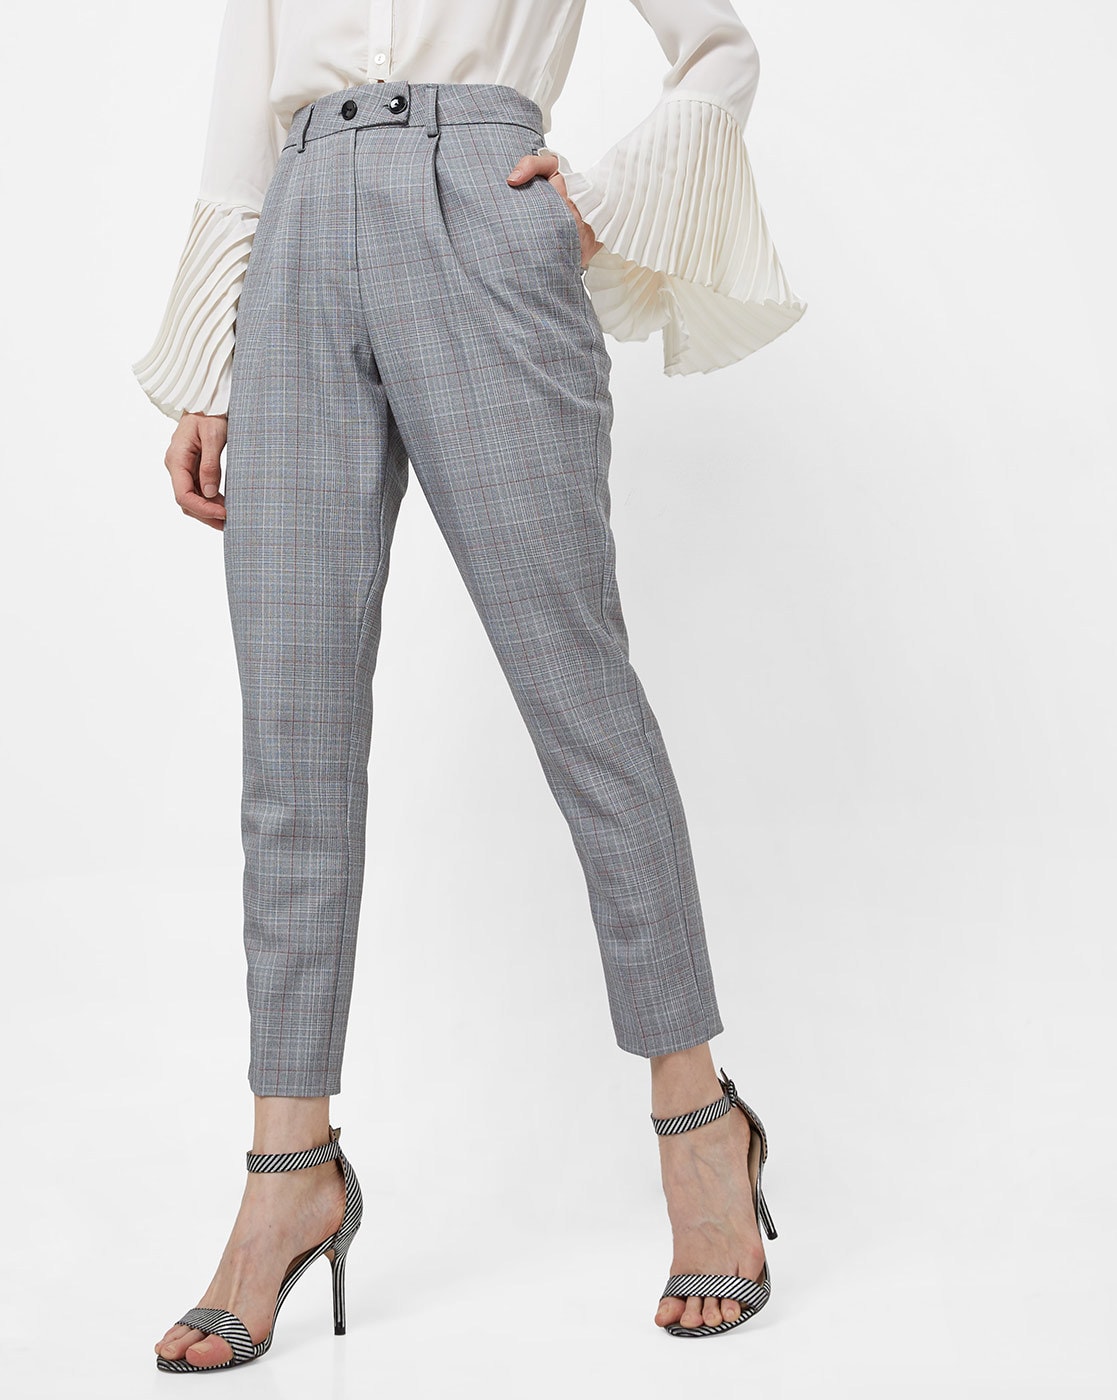 Charcoal/Black Check | Slim Leg Wool Blend Trouser | Pure Collection